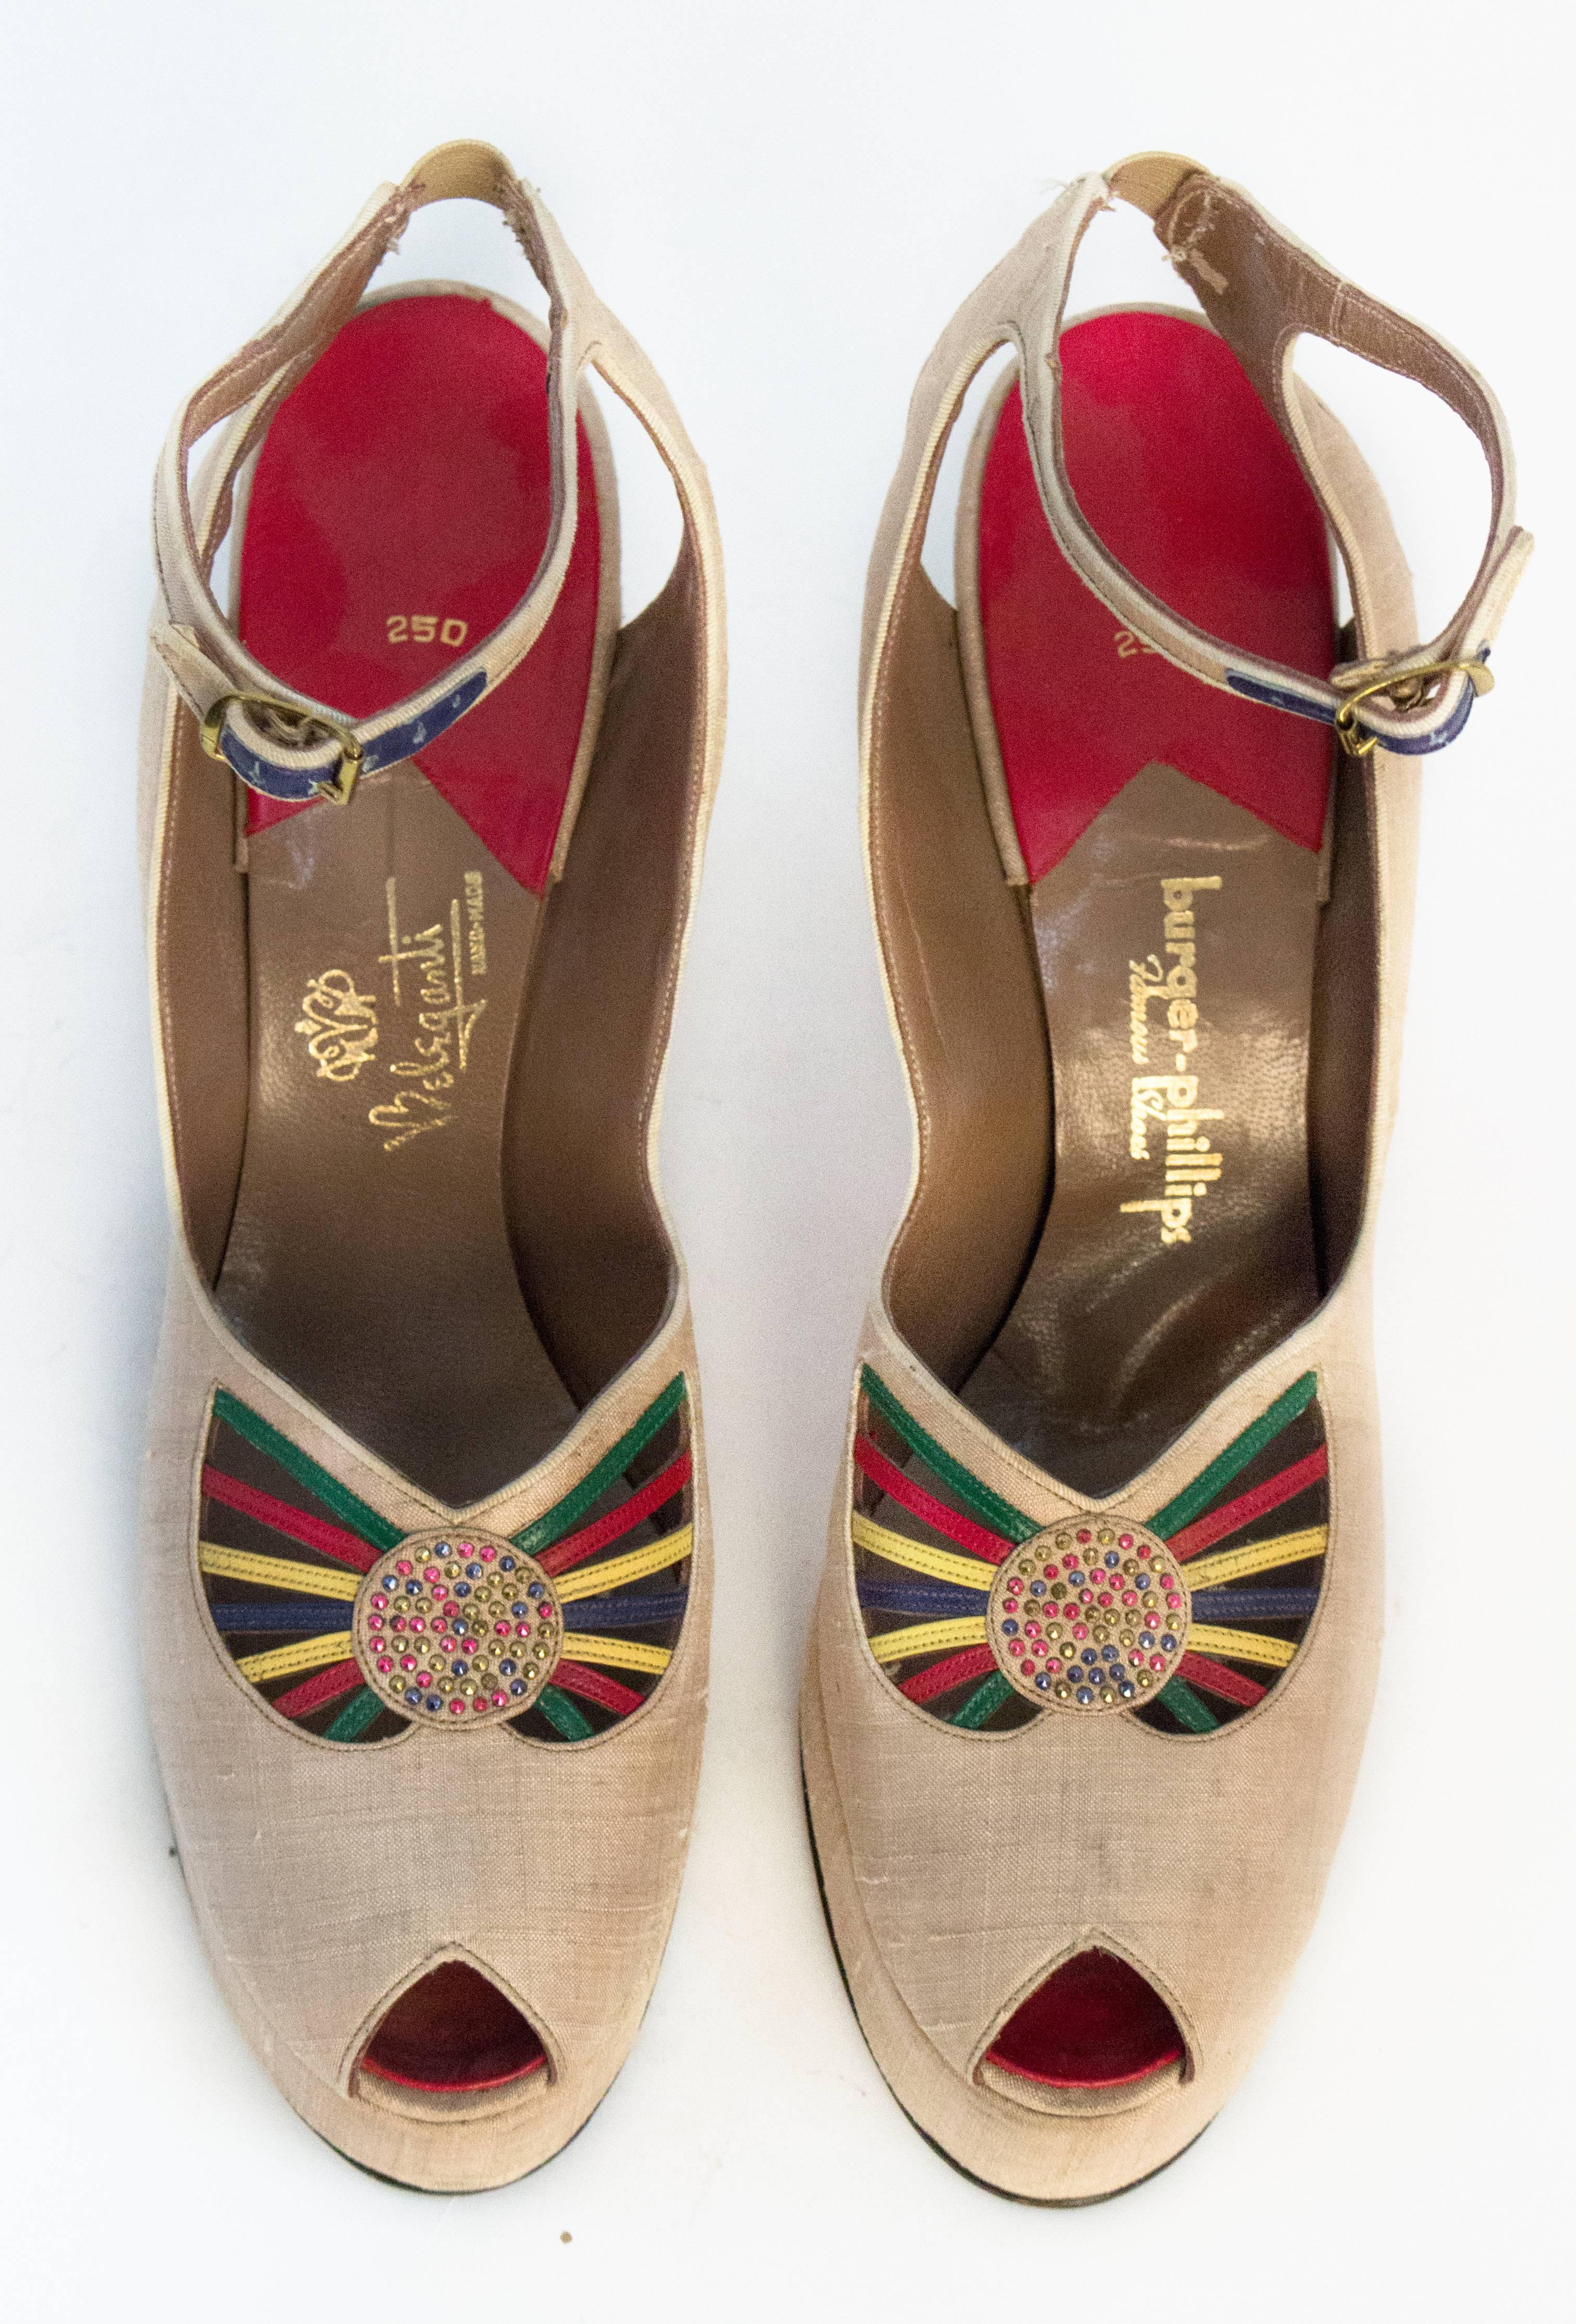 40s silk platform ankle strap heels with colorful leather & studded embellishments. Leather soles. One inch of elastic at the back of the heel allows for some give. 

Measurements:
Insole: 10 1/4"
Palm of the Foot: 2